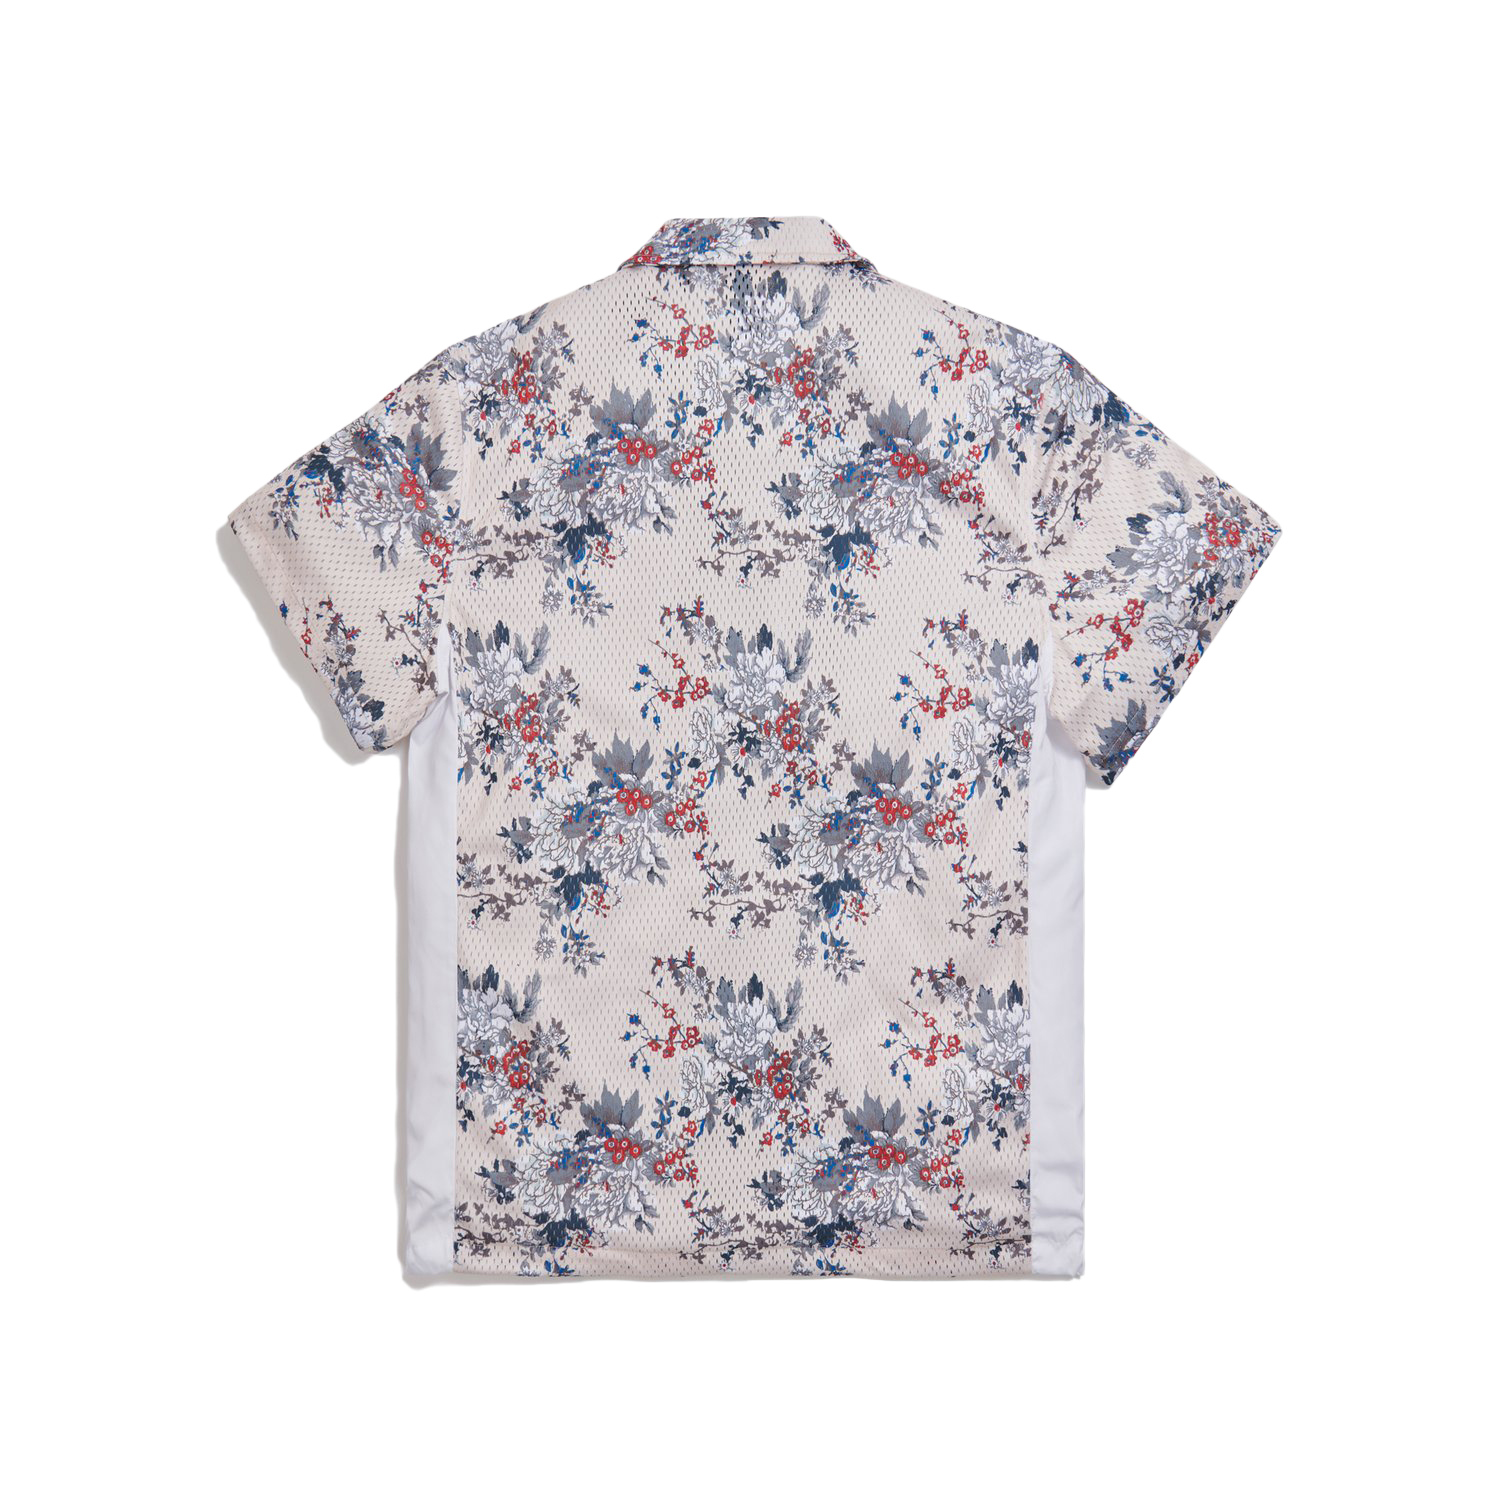 KITH Floral Panel S/S Camp Shirt